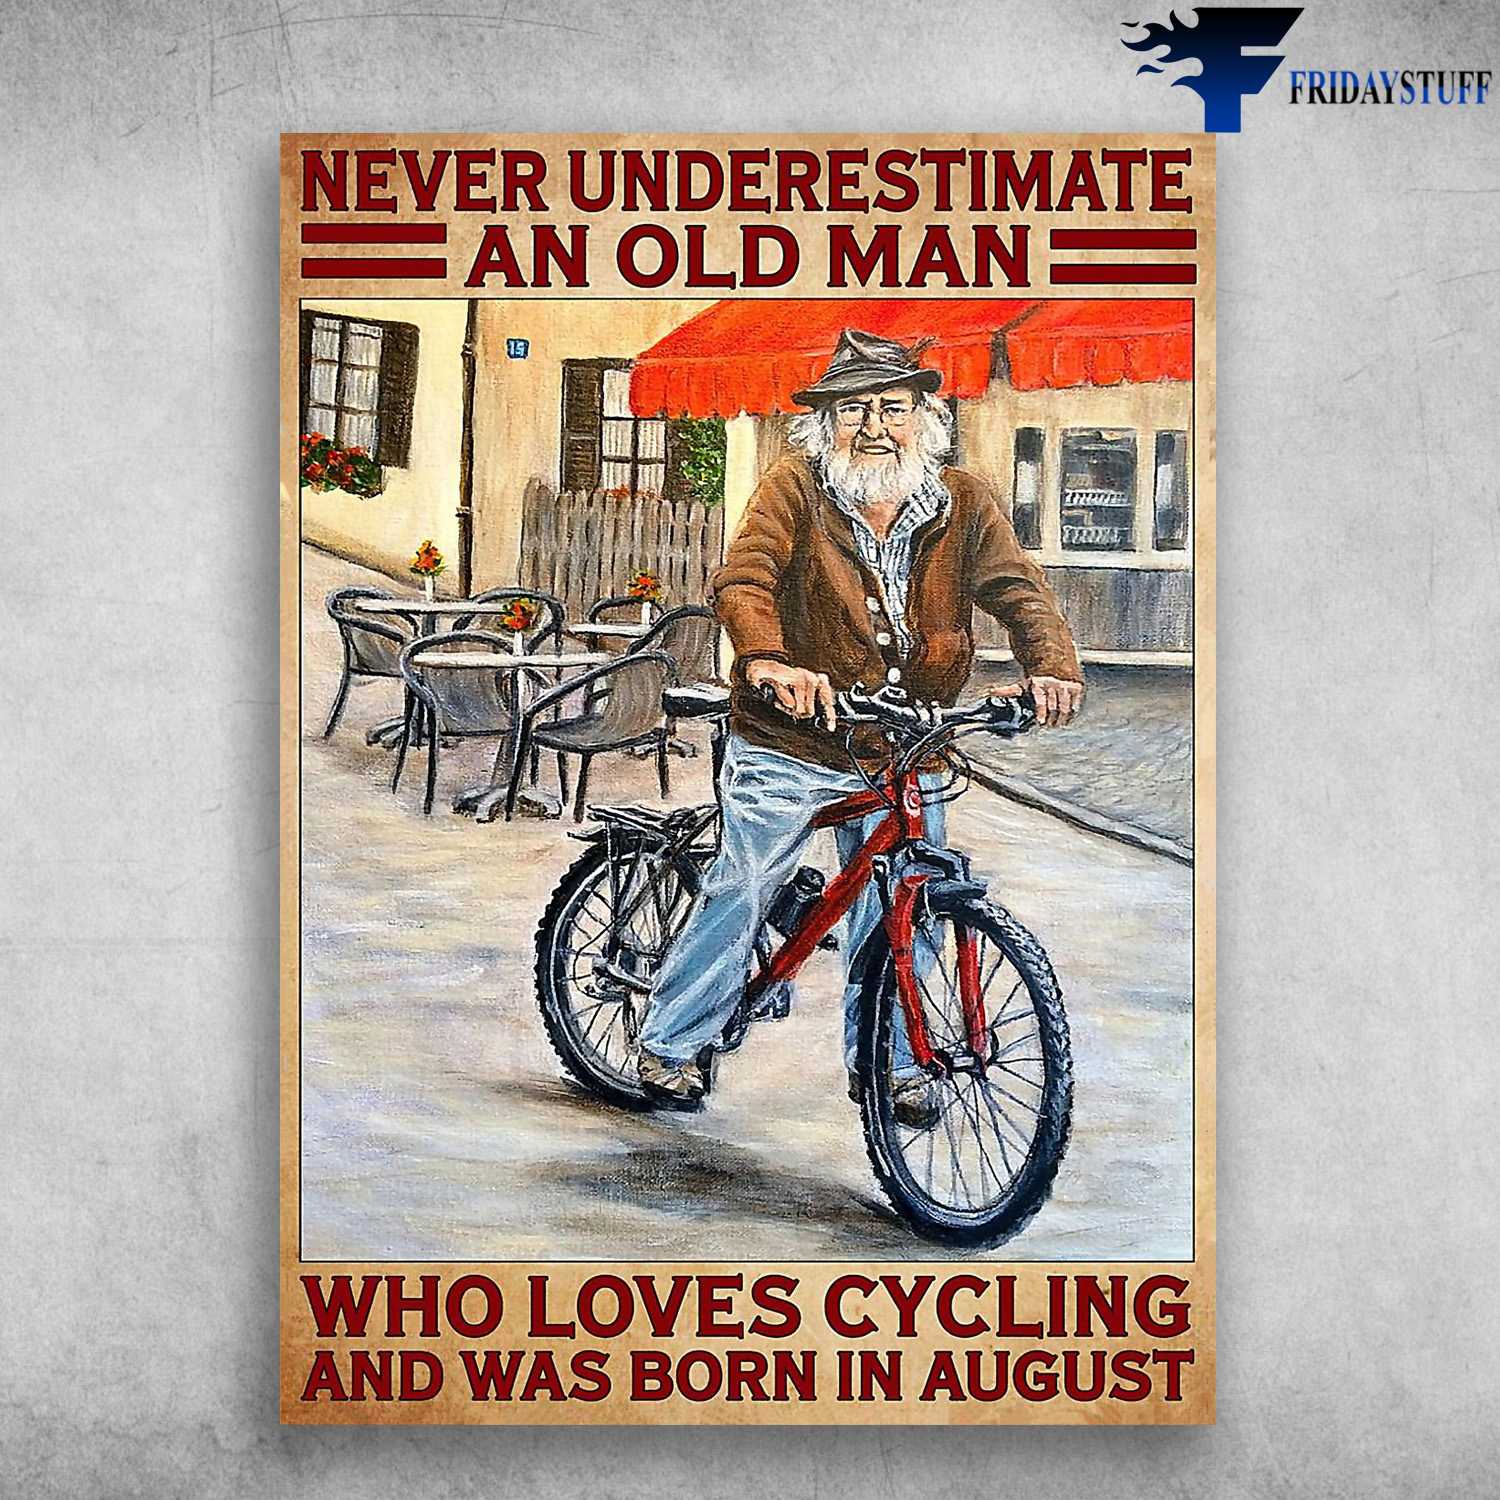 Old Man Cycling, Biker Lover - Never Underestimate An Old Man, Who Loves Cycling, And Was Born In August, August Birthday